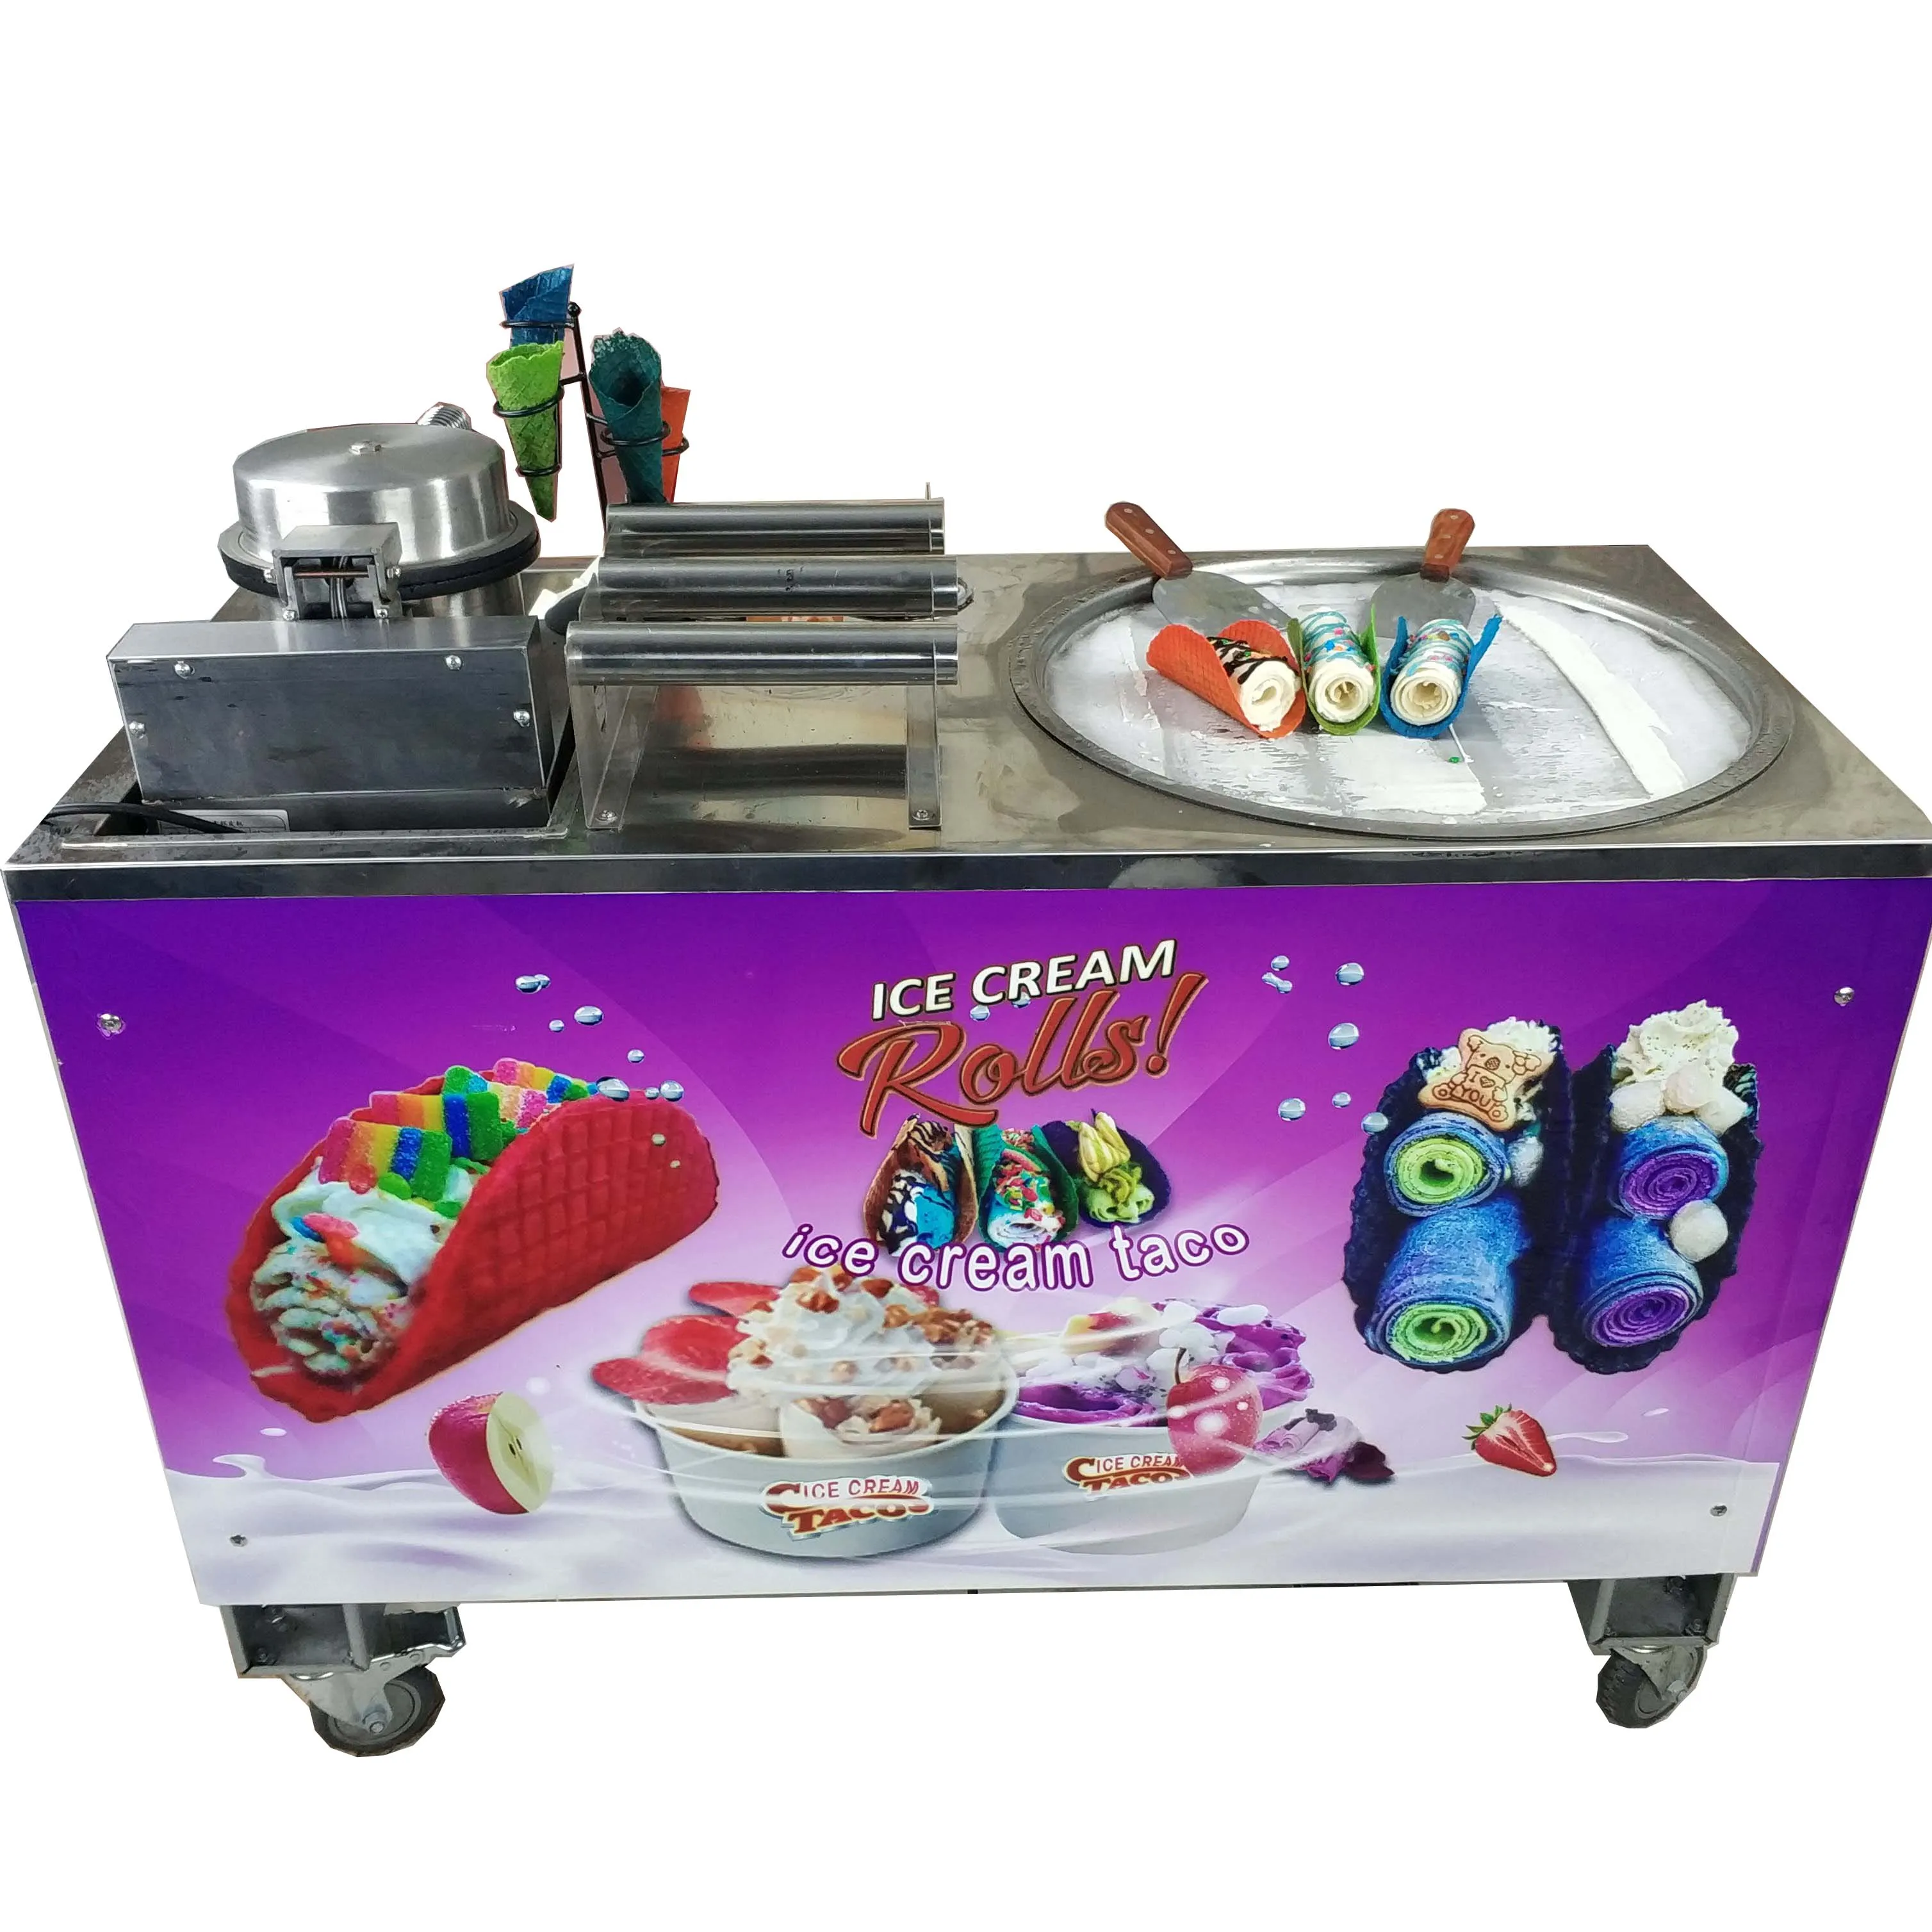 NEW Commercial Fried Ice Cream Machine,Ice Crean Roll Making Machine 220V 